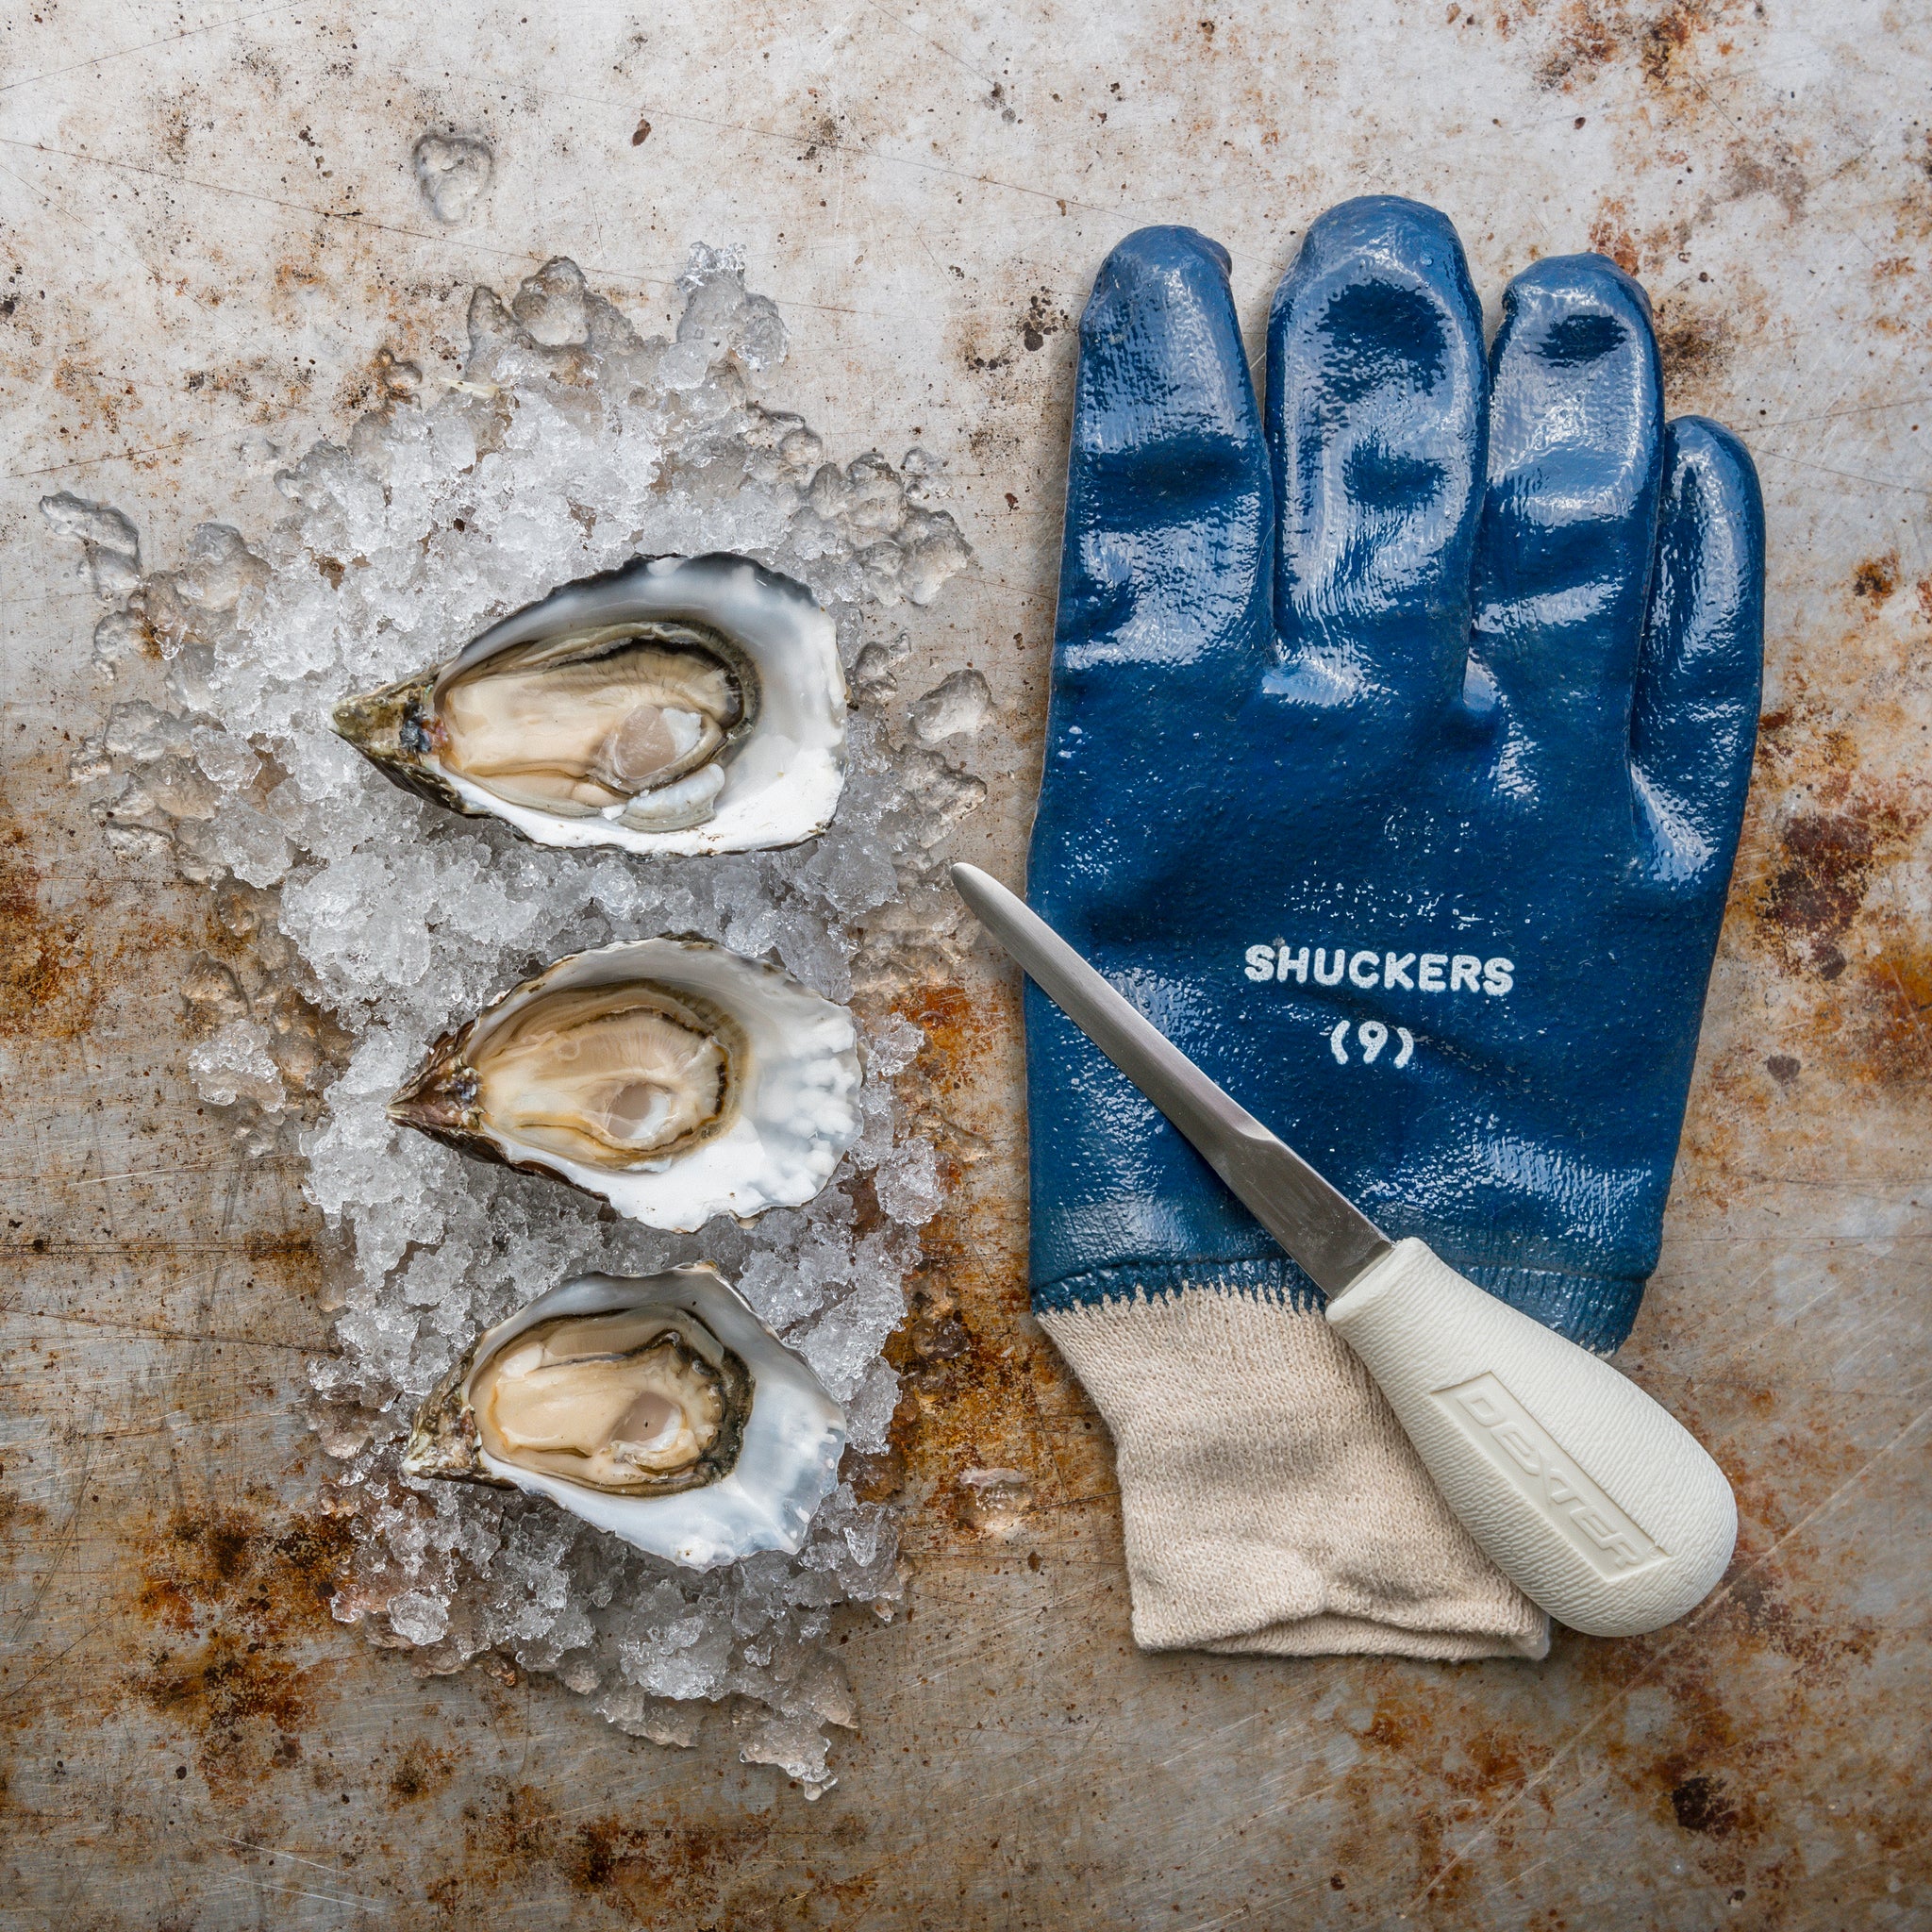 Oyster Shucking Kit,Oyster Knife And Glove Set,Sturdy And